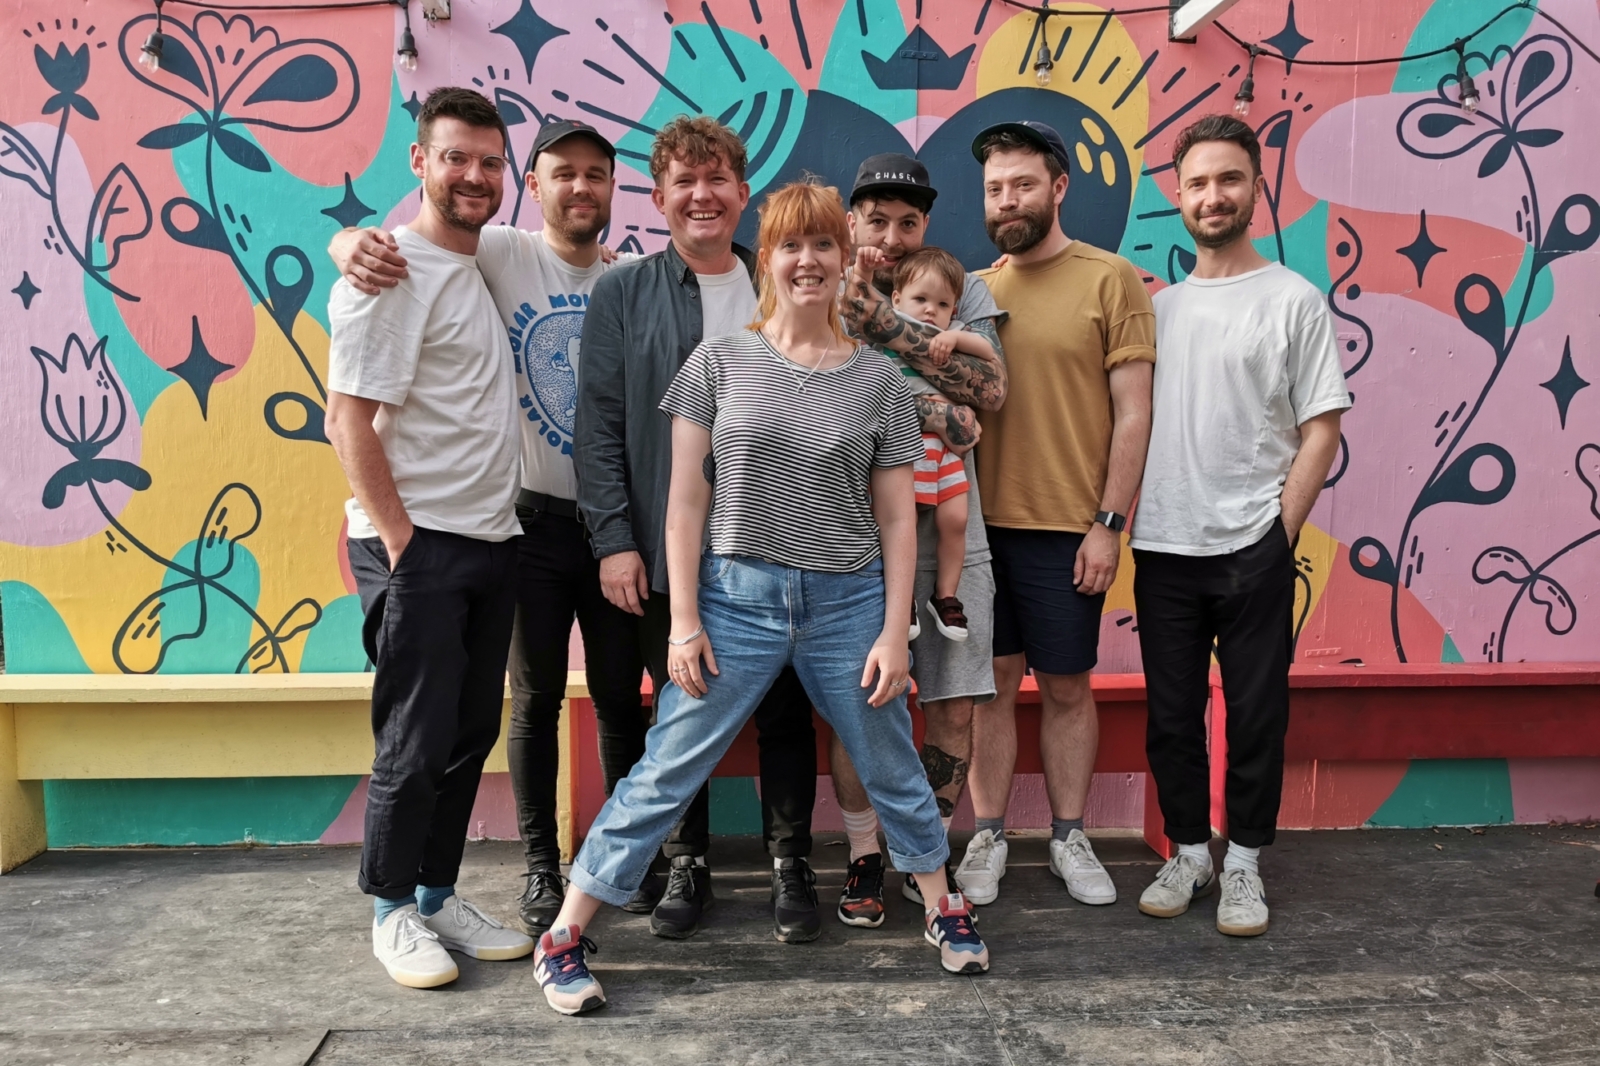 Los Campesinos! announce 'Romance Is Boring' reissue to celebrate 10th anniversary